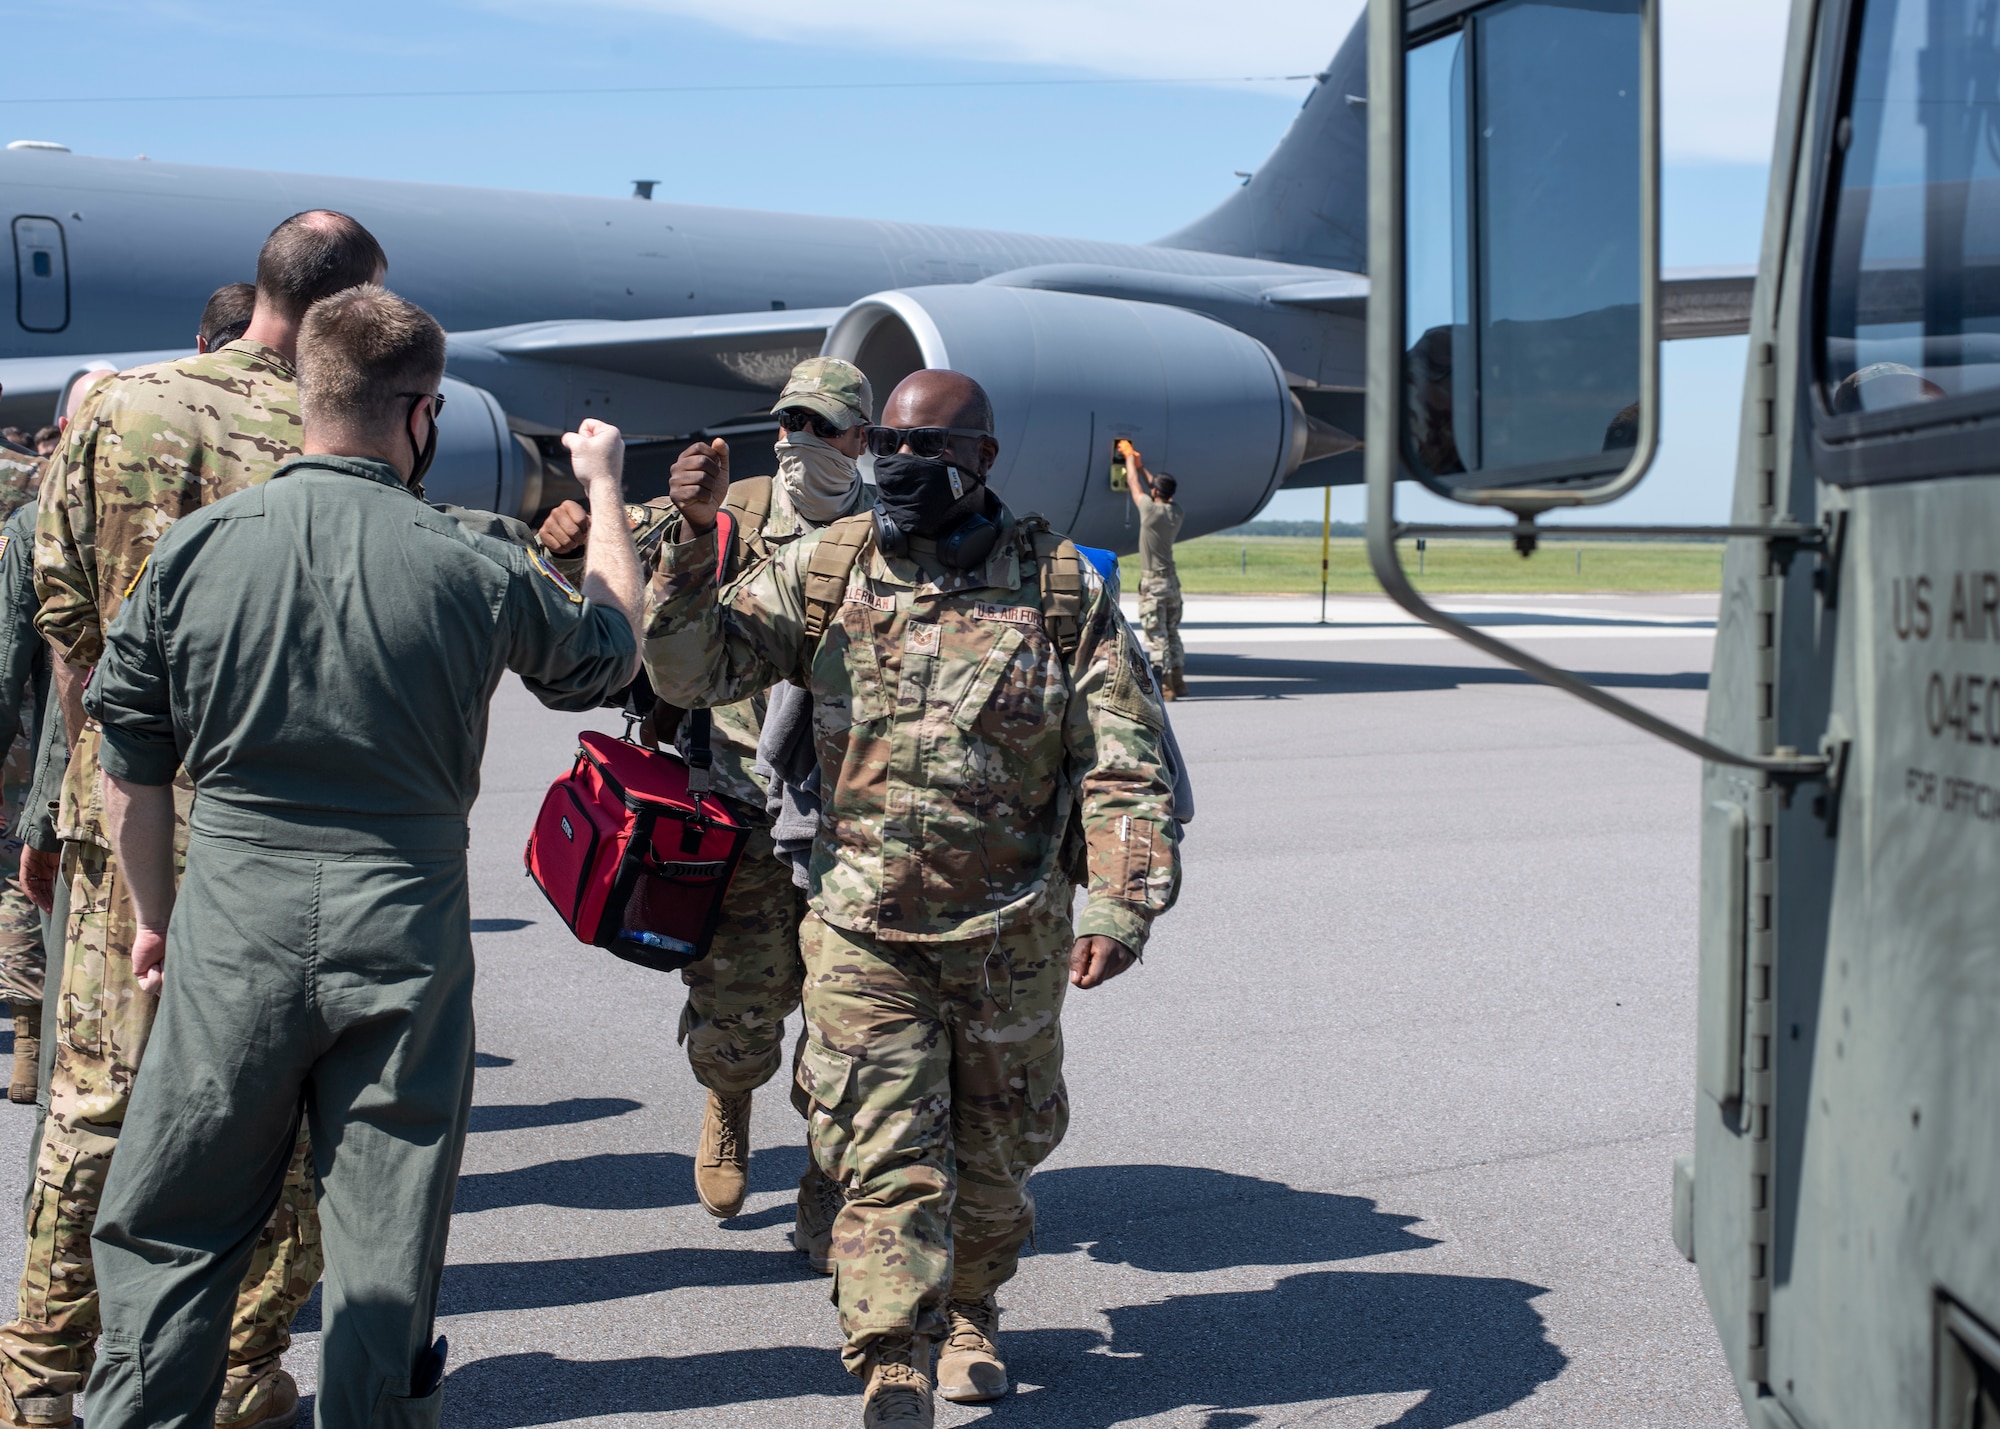 Airmen from the 6th Maintenance Group are greeted by their wingmen after returning from deployment at MacDill Air Force Base, Florida, Sept. 27, 2021.